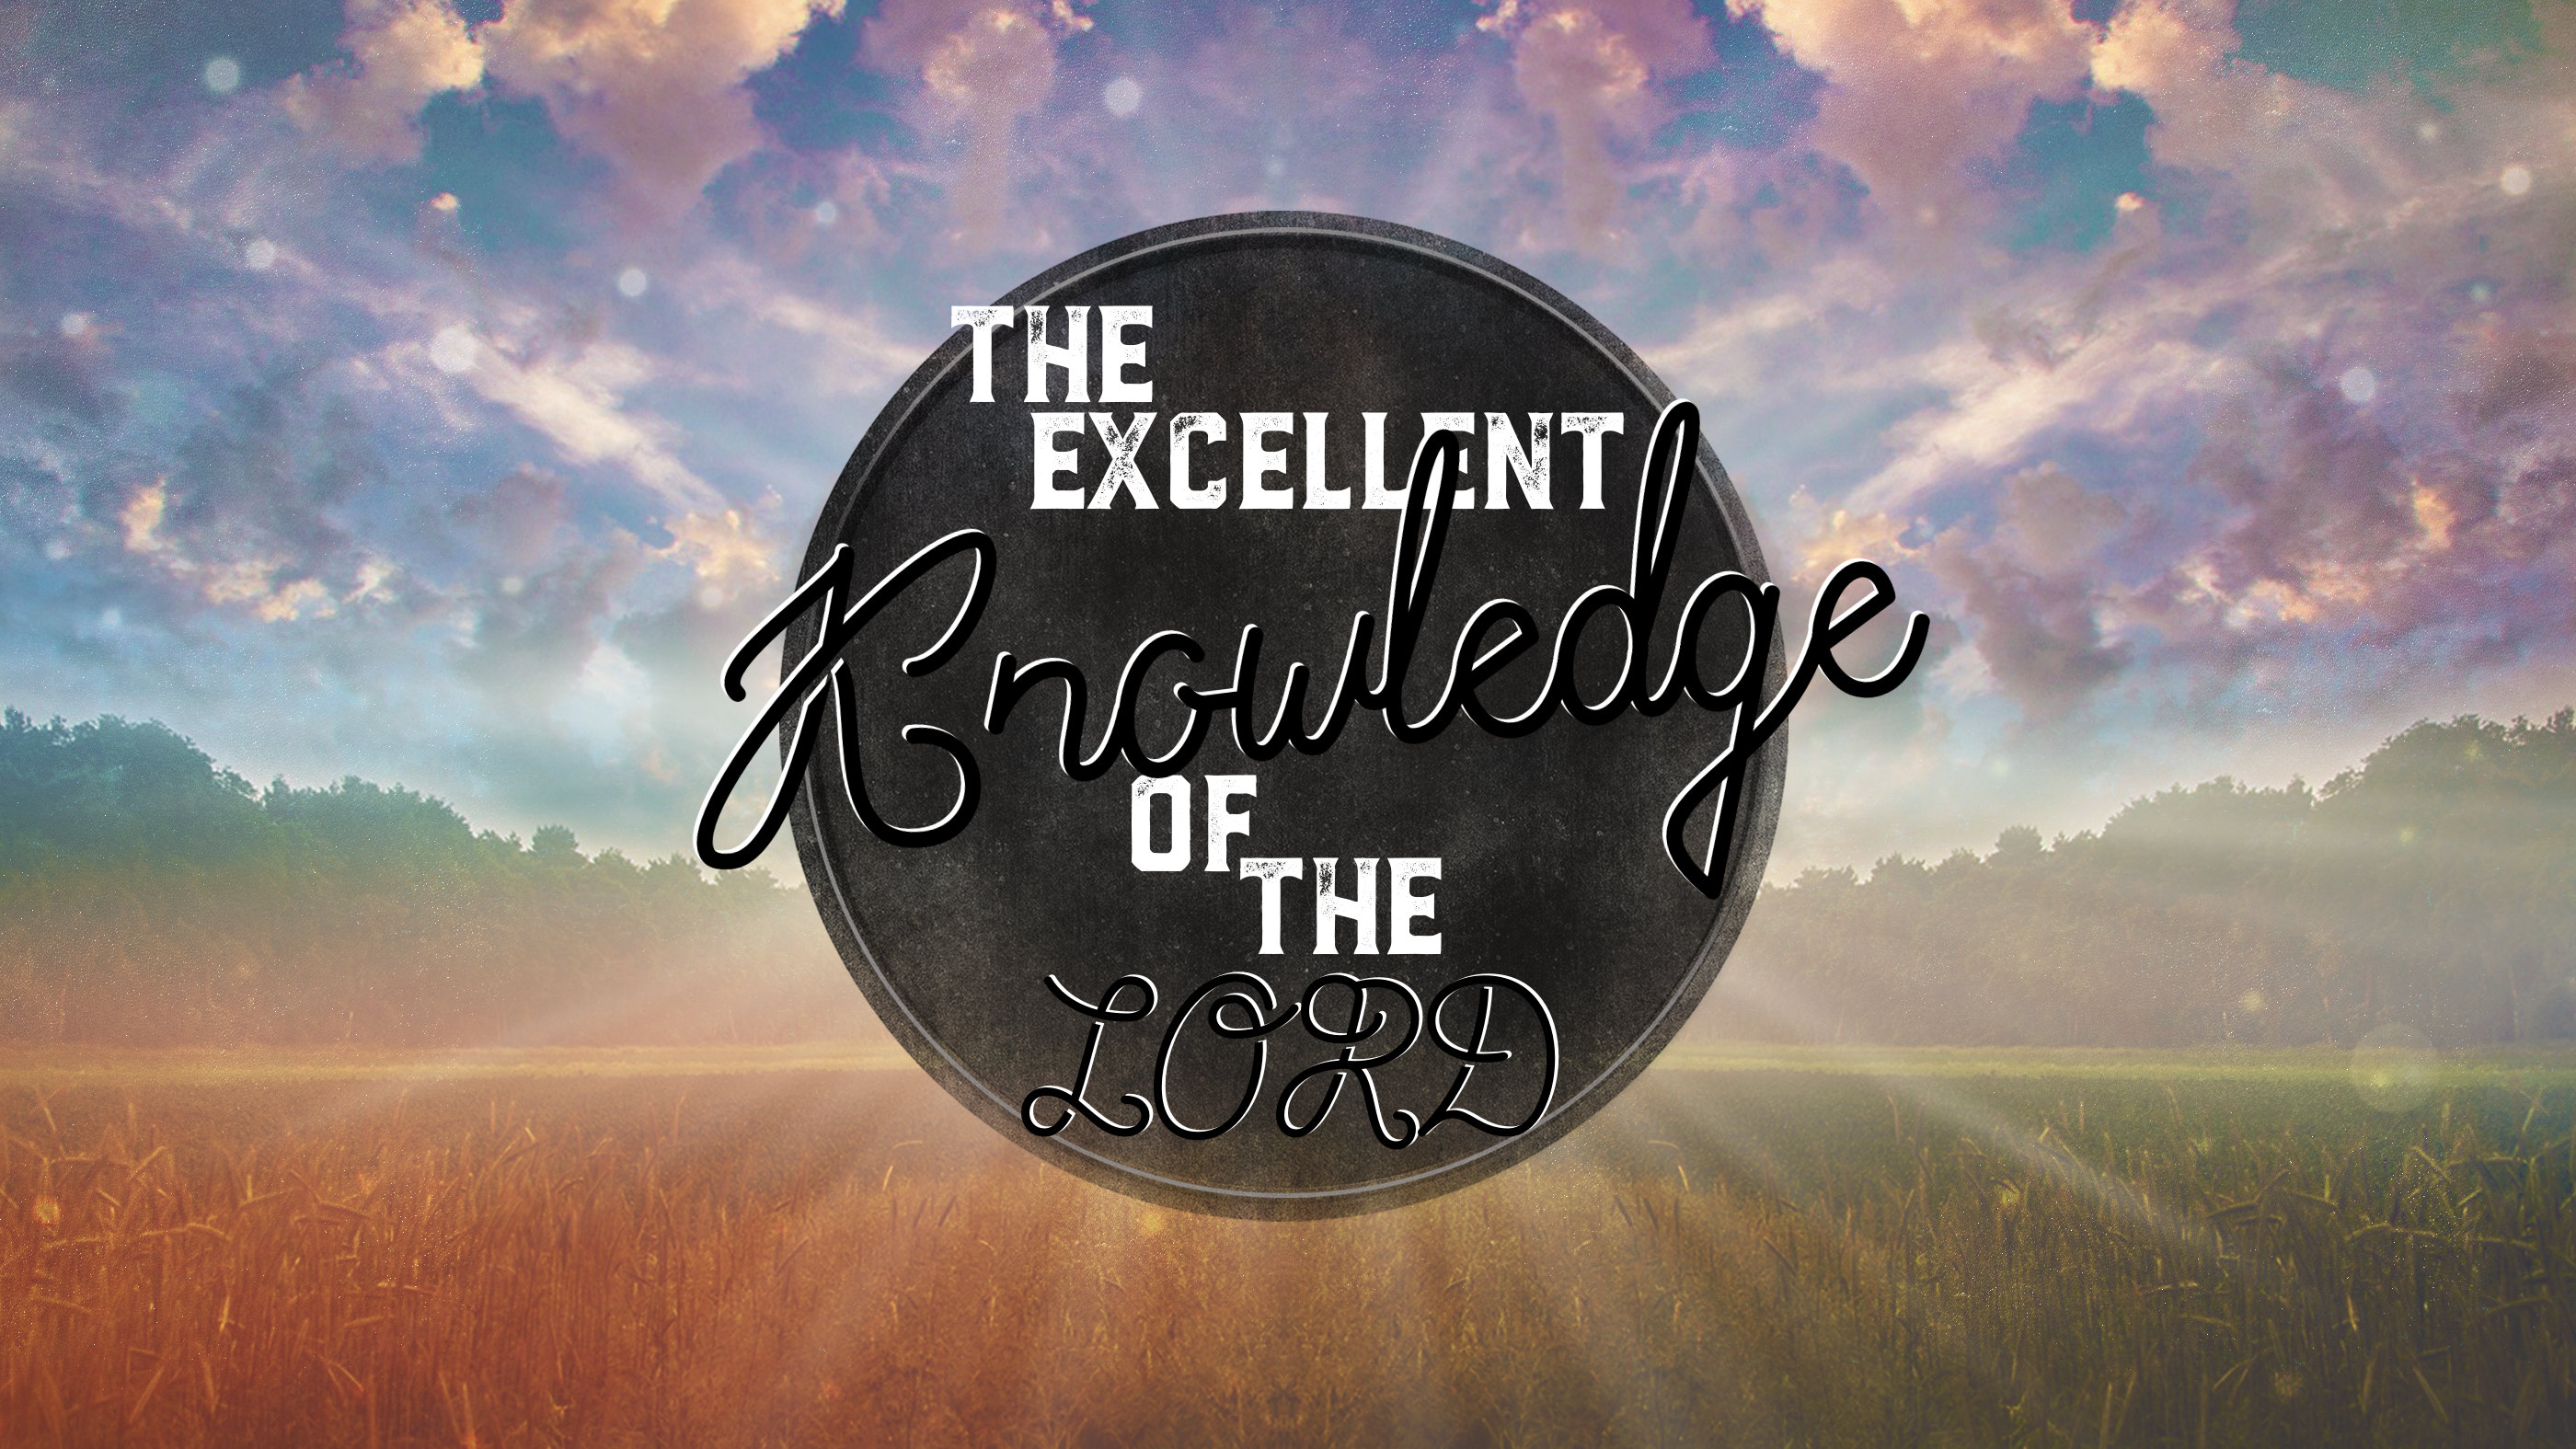 The Excellent Knowledge of the Lord - April 10, 2016 PM